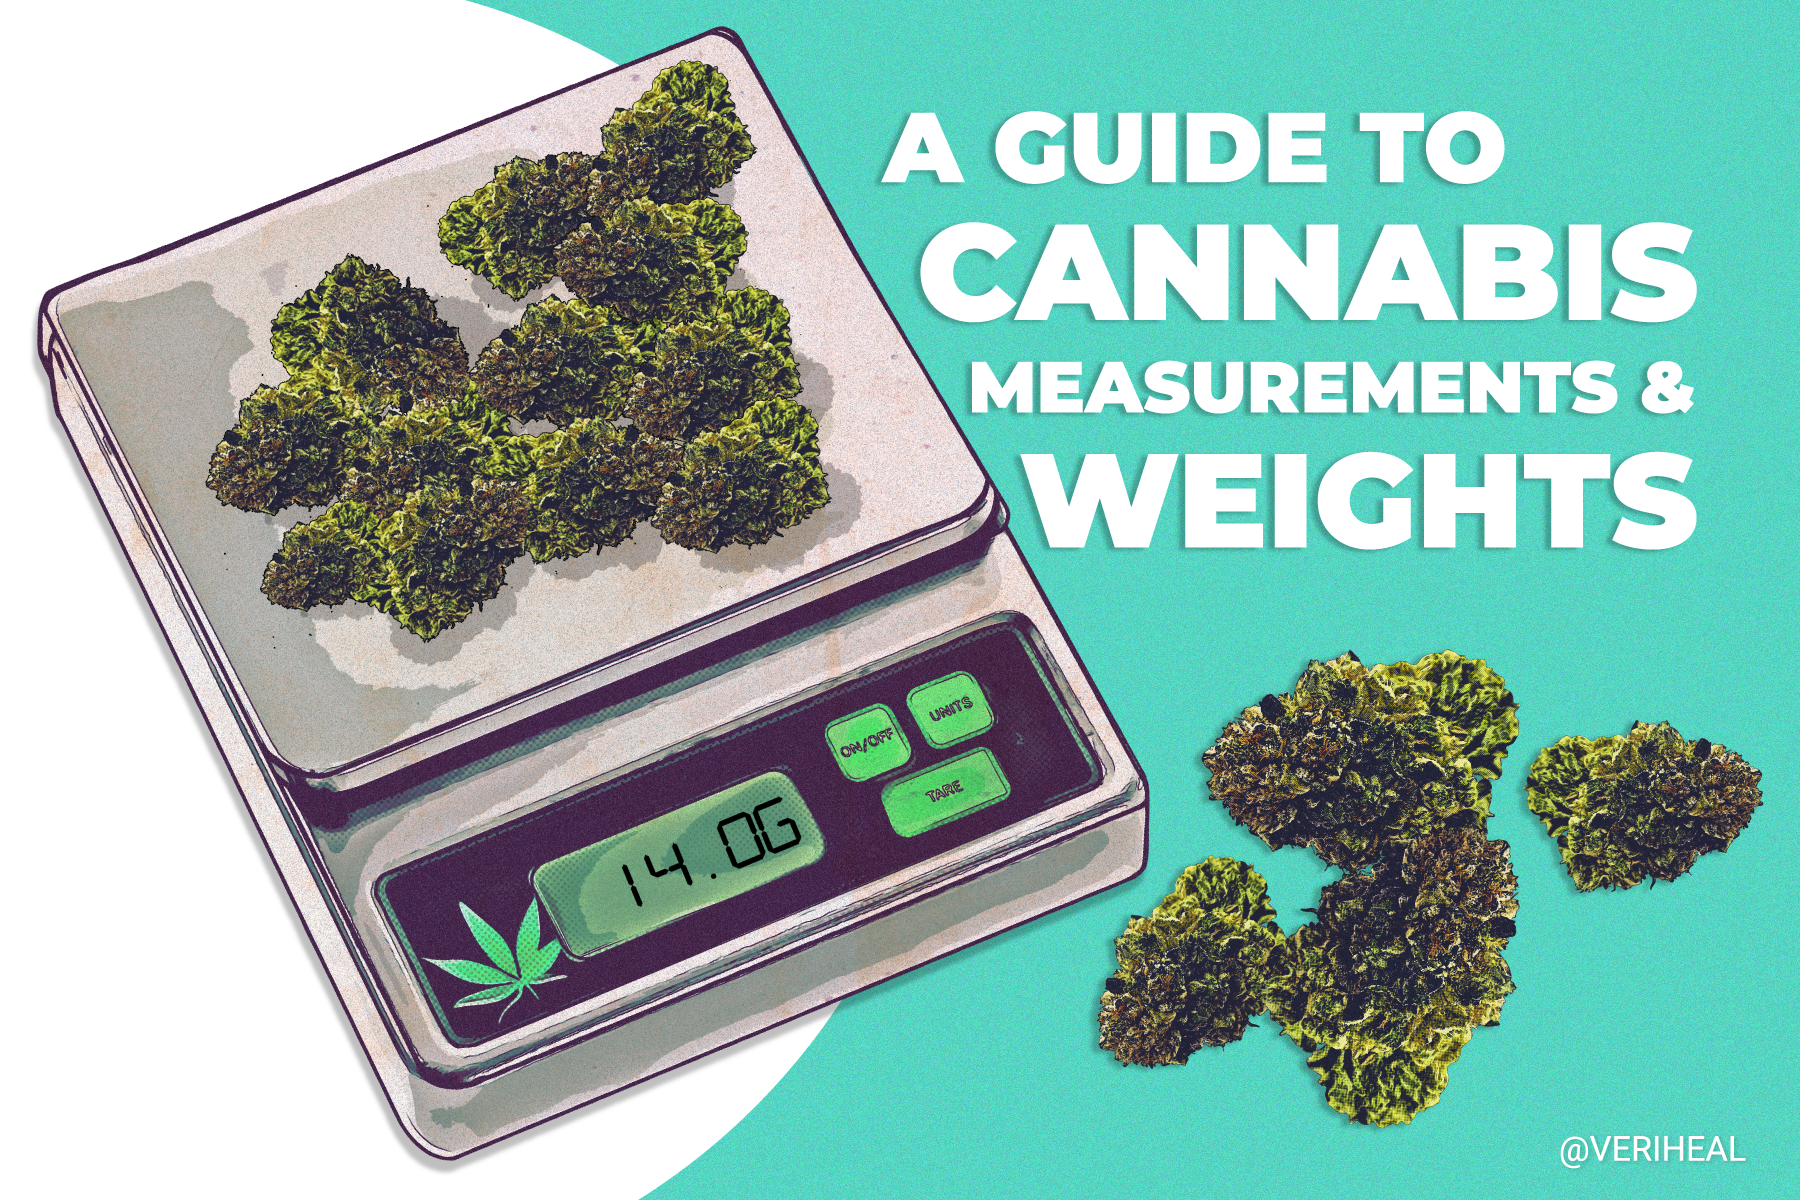 A Guide to Cannabis Measurements and Weights